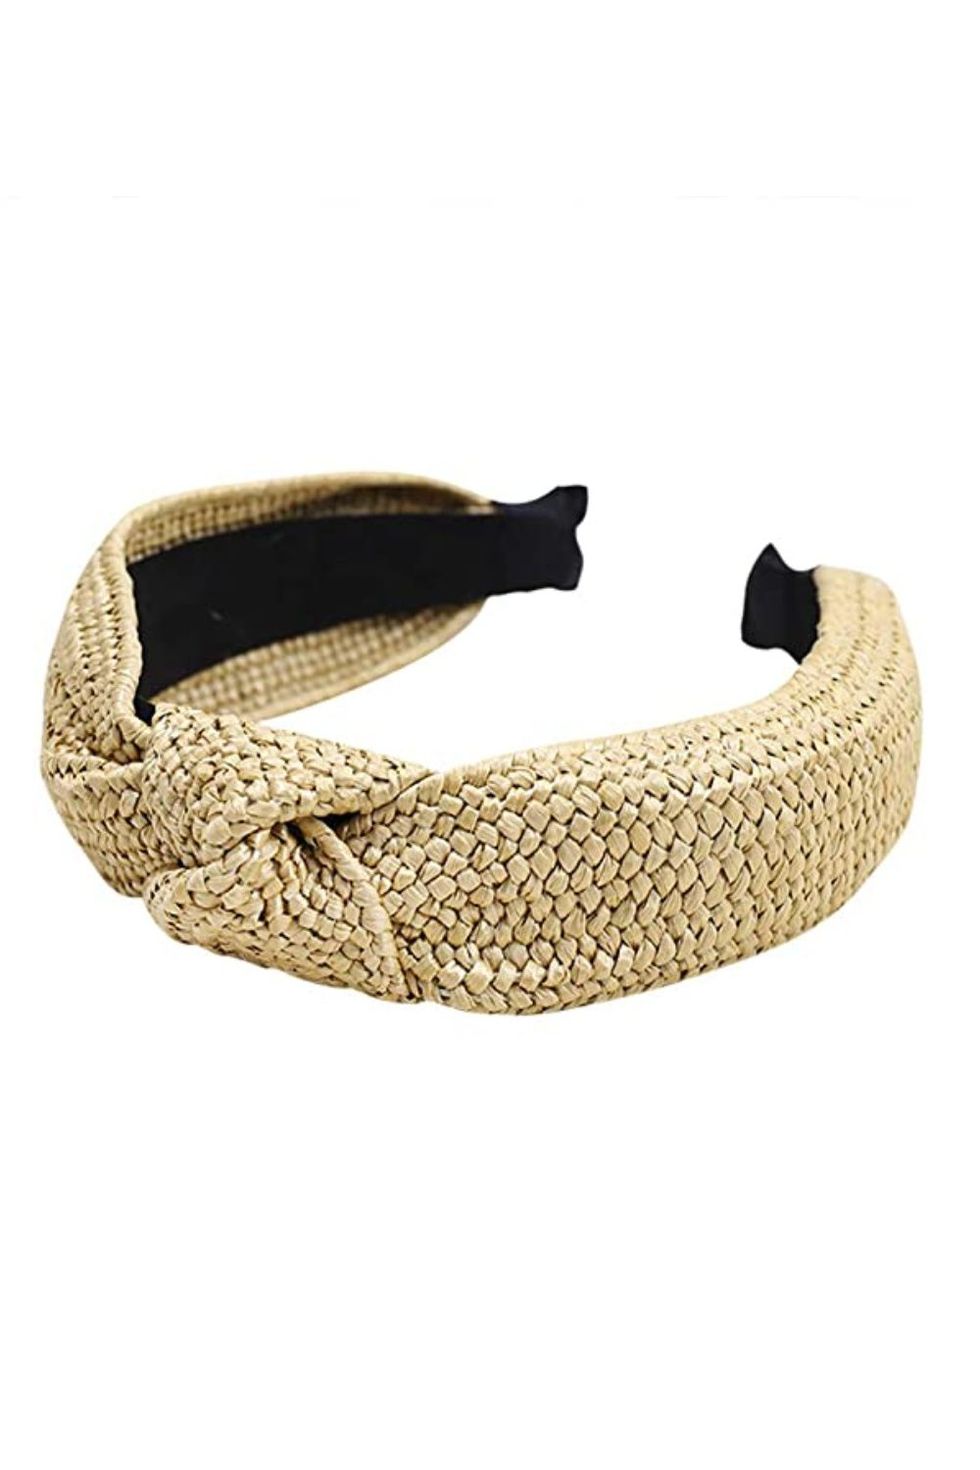 15 Designer Headbands For Women That Will Elevate Any Outfit – topsfordays